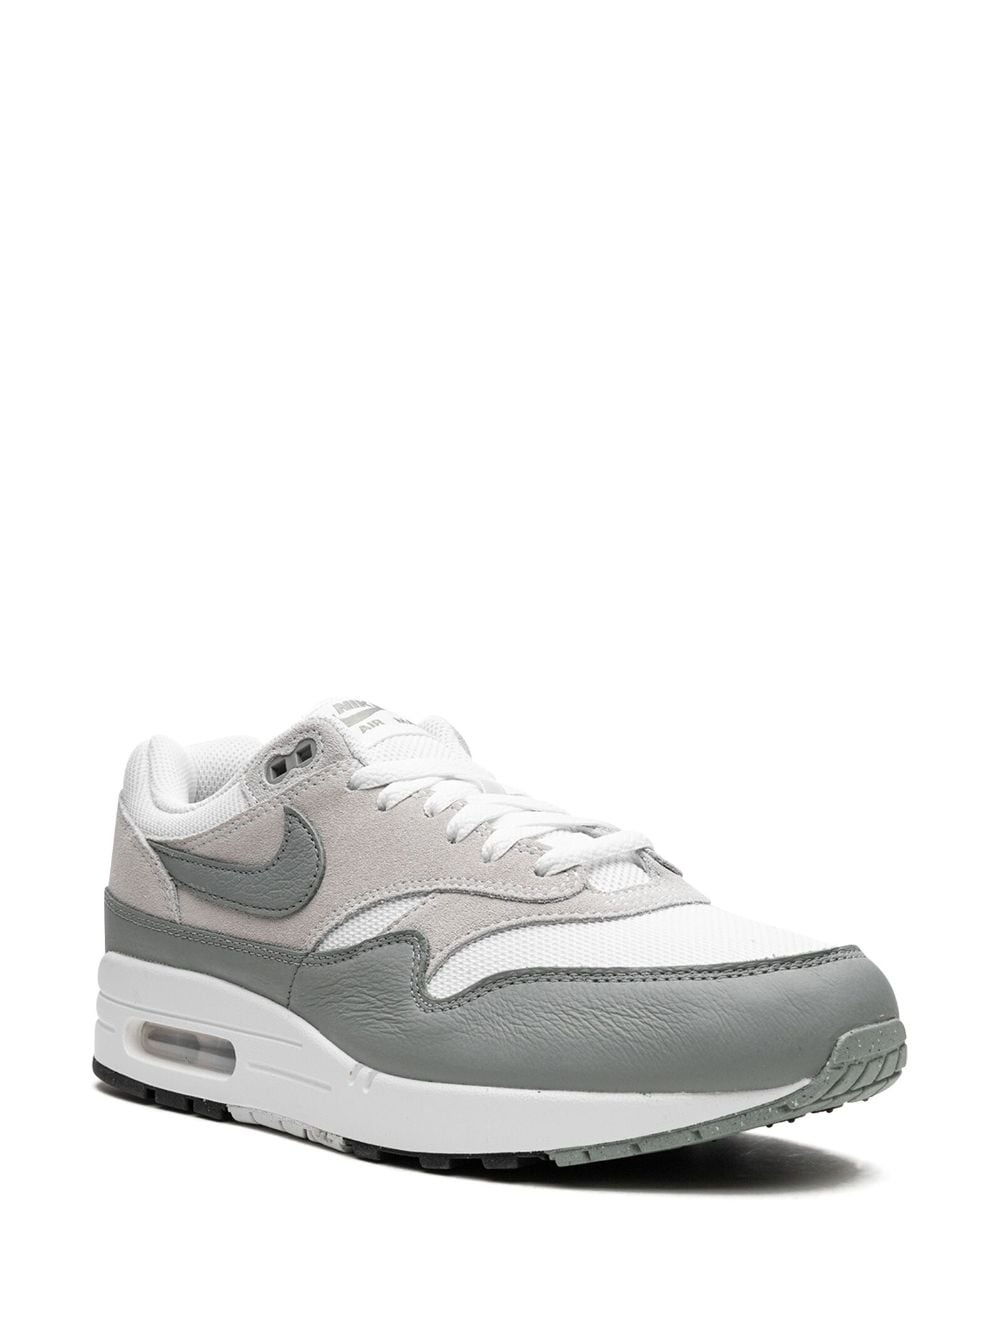 Air Max 1 "White/Mica Green" sneakers - 2